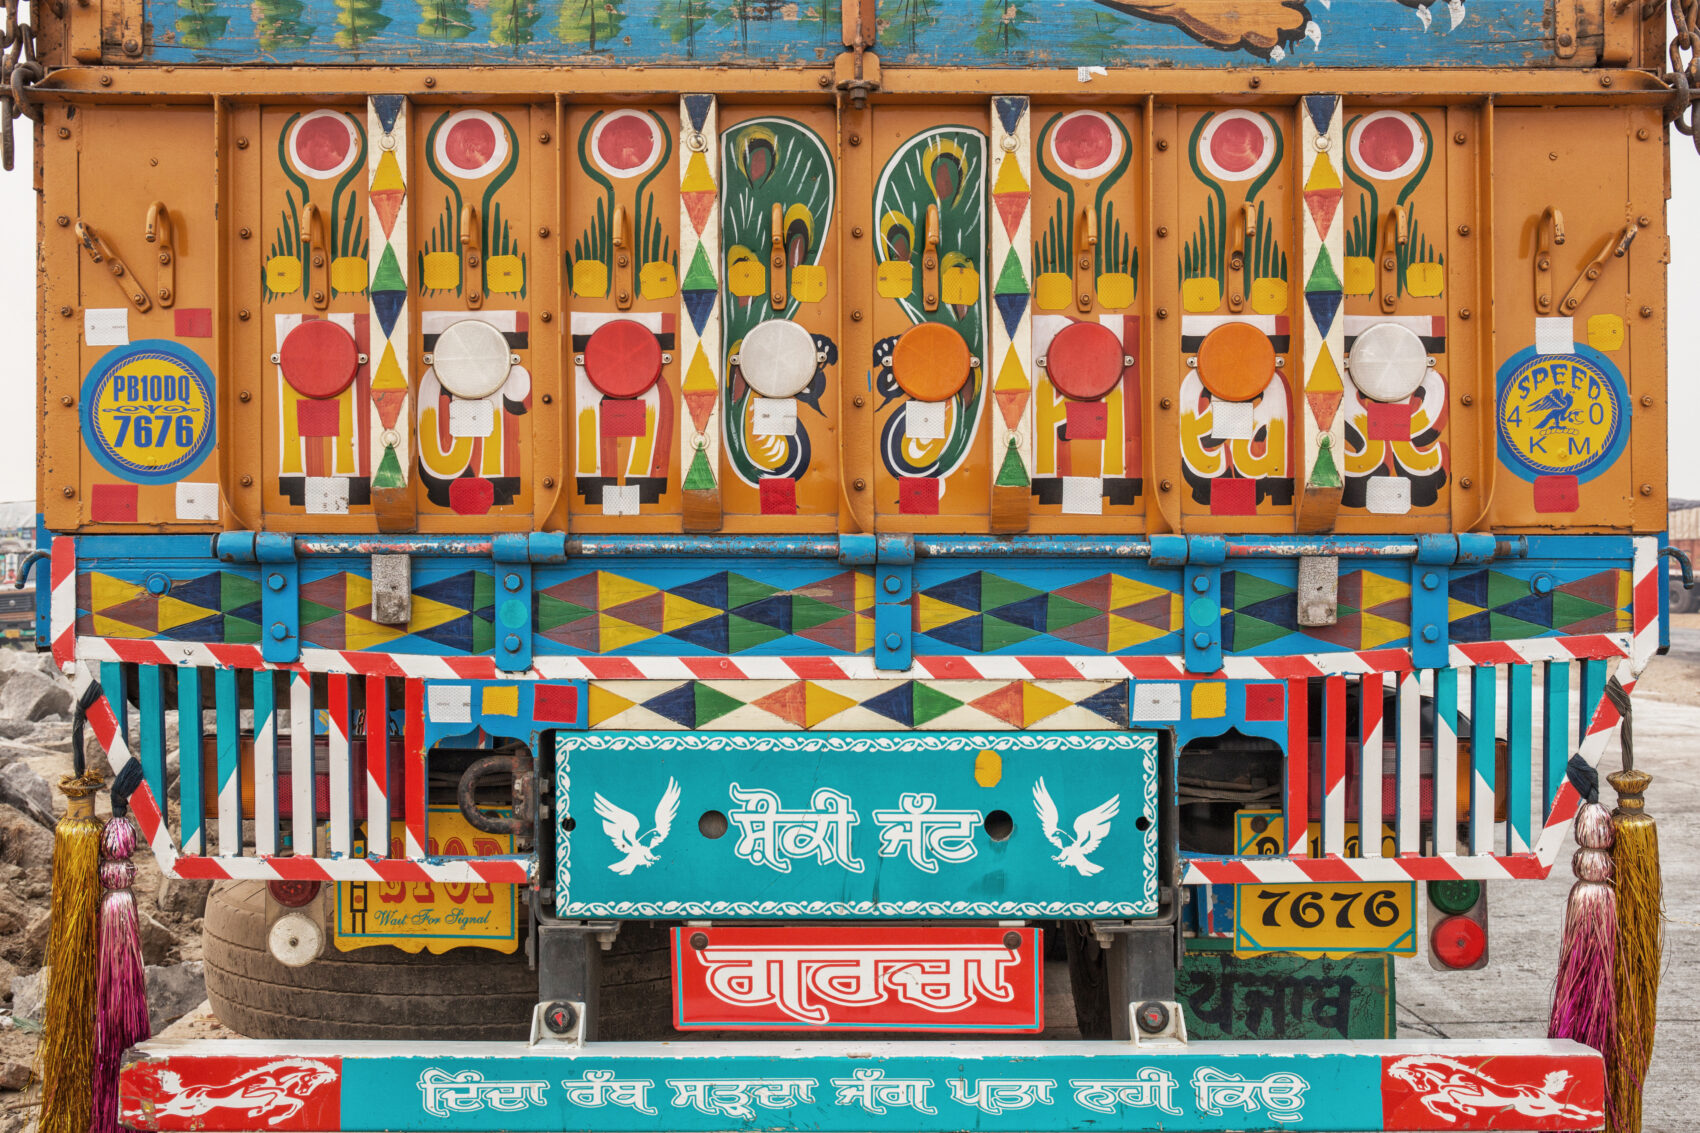 Indian painted truck